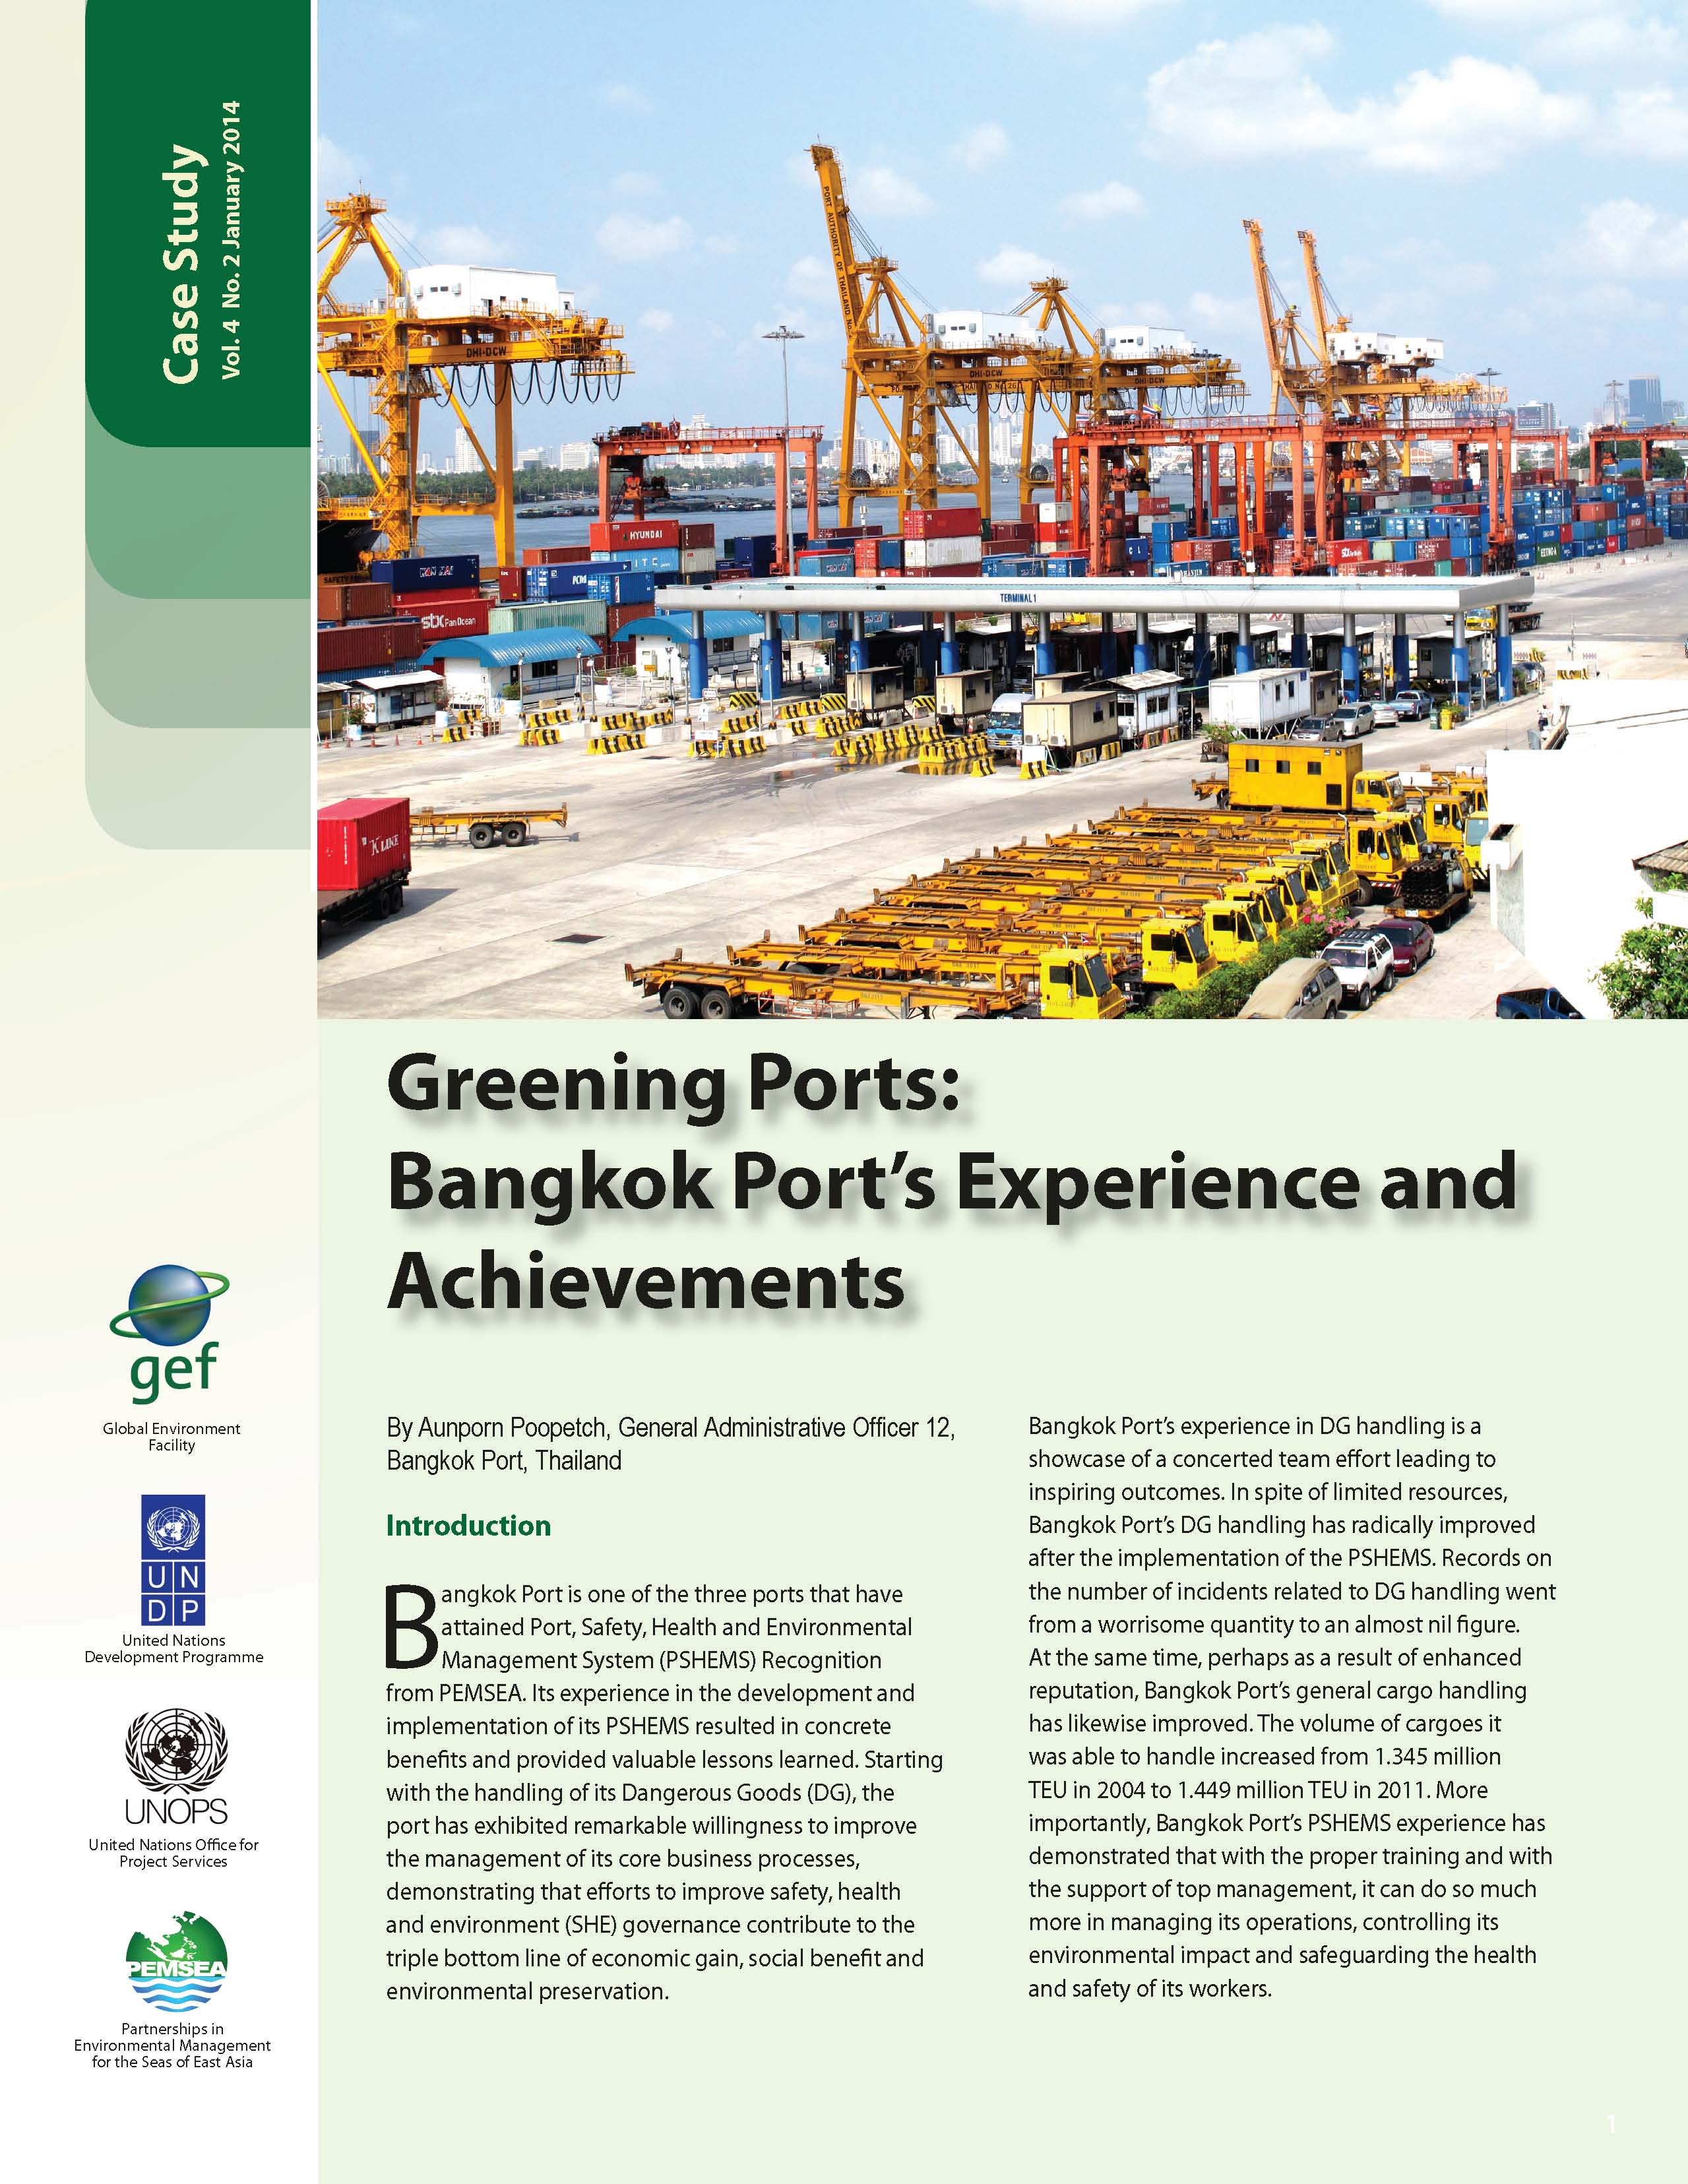 Greening Ports Bangkok Port’s Experience and Achievements